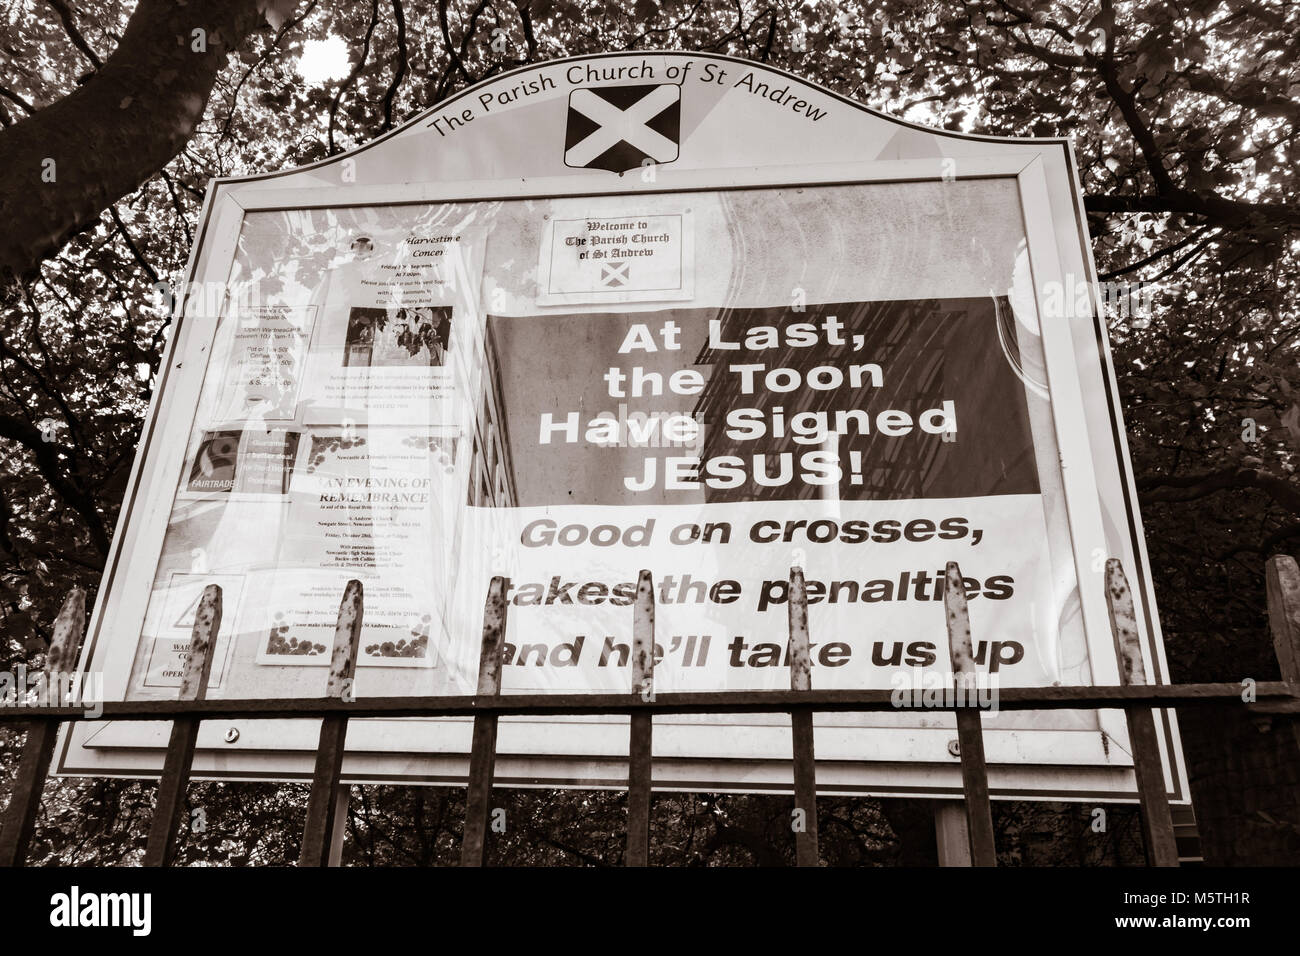 Church noticeboard using football/Jesus analogy in Newcastle upon Tyne, England. UK. Newcastle United are know locally as 'The Toon' Stock Photo